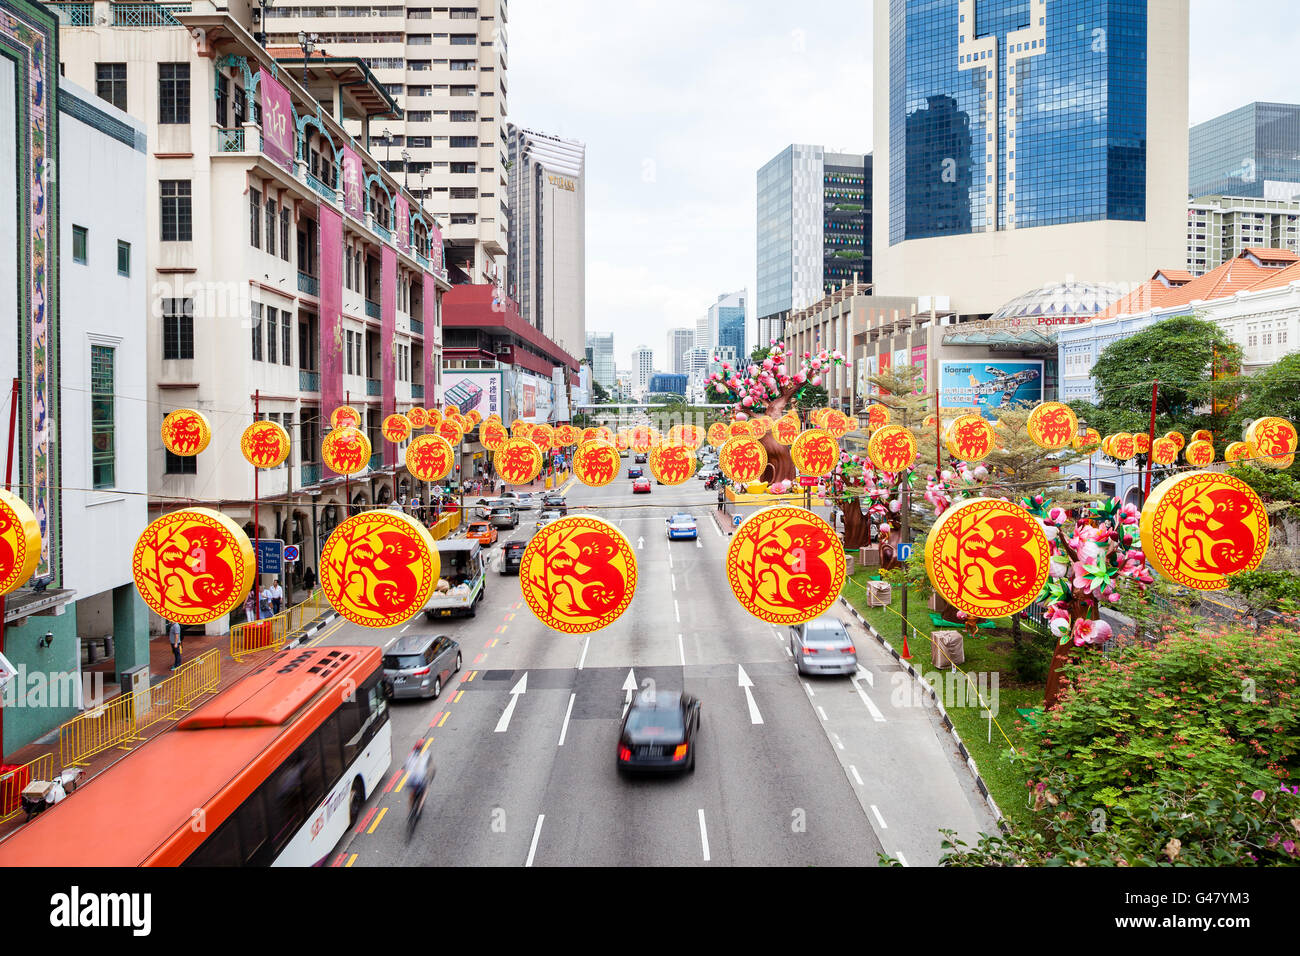 Singapore  - January 17, 2016: Colorful decorations hang over the streets in Chinatown to celebrate Chinese New Year. Stock Photo